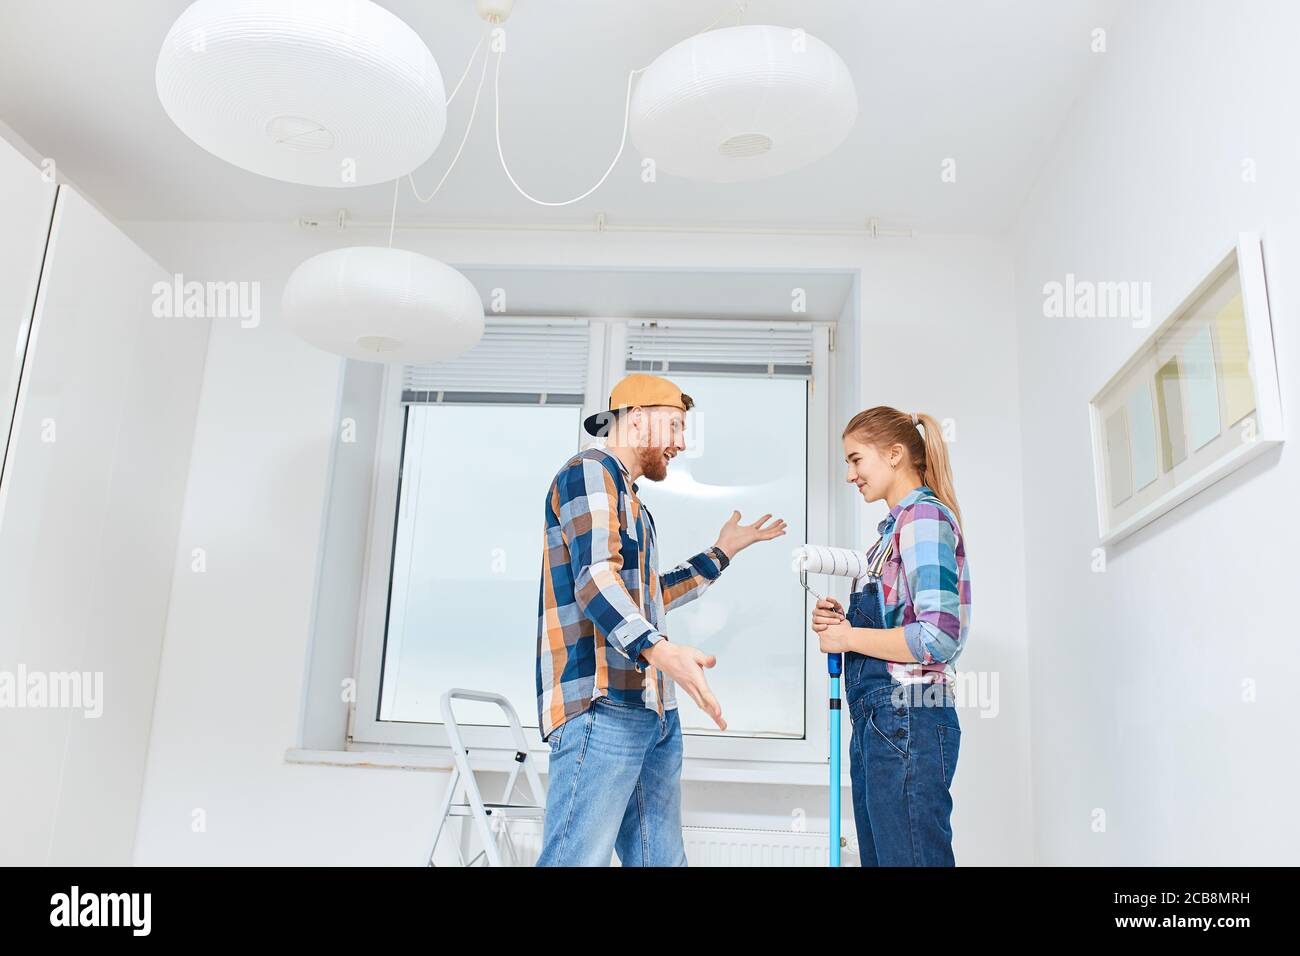 People, renovation concept - Young woman and man discussing colour of paint for walls standing in empty white room Stock Photo